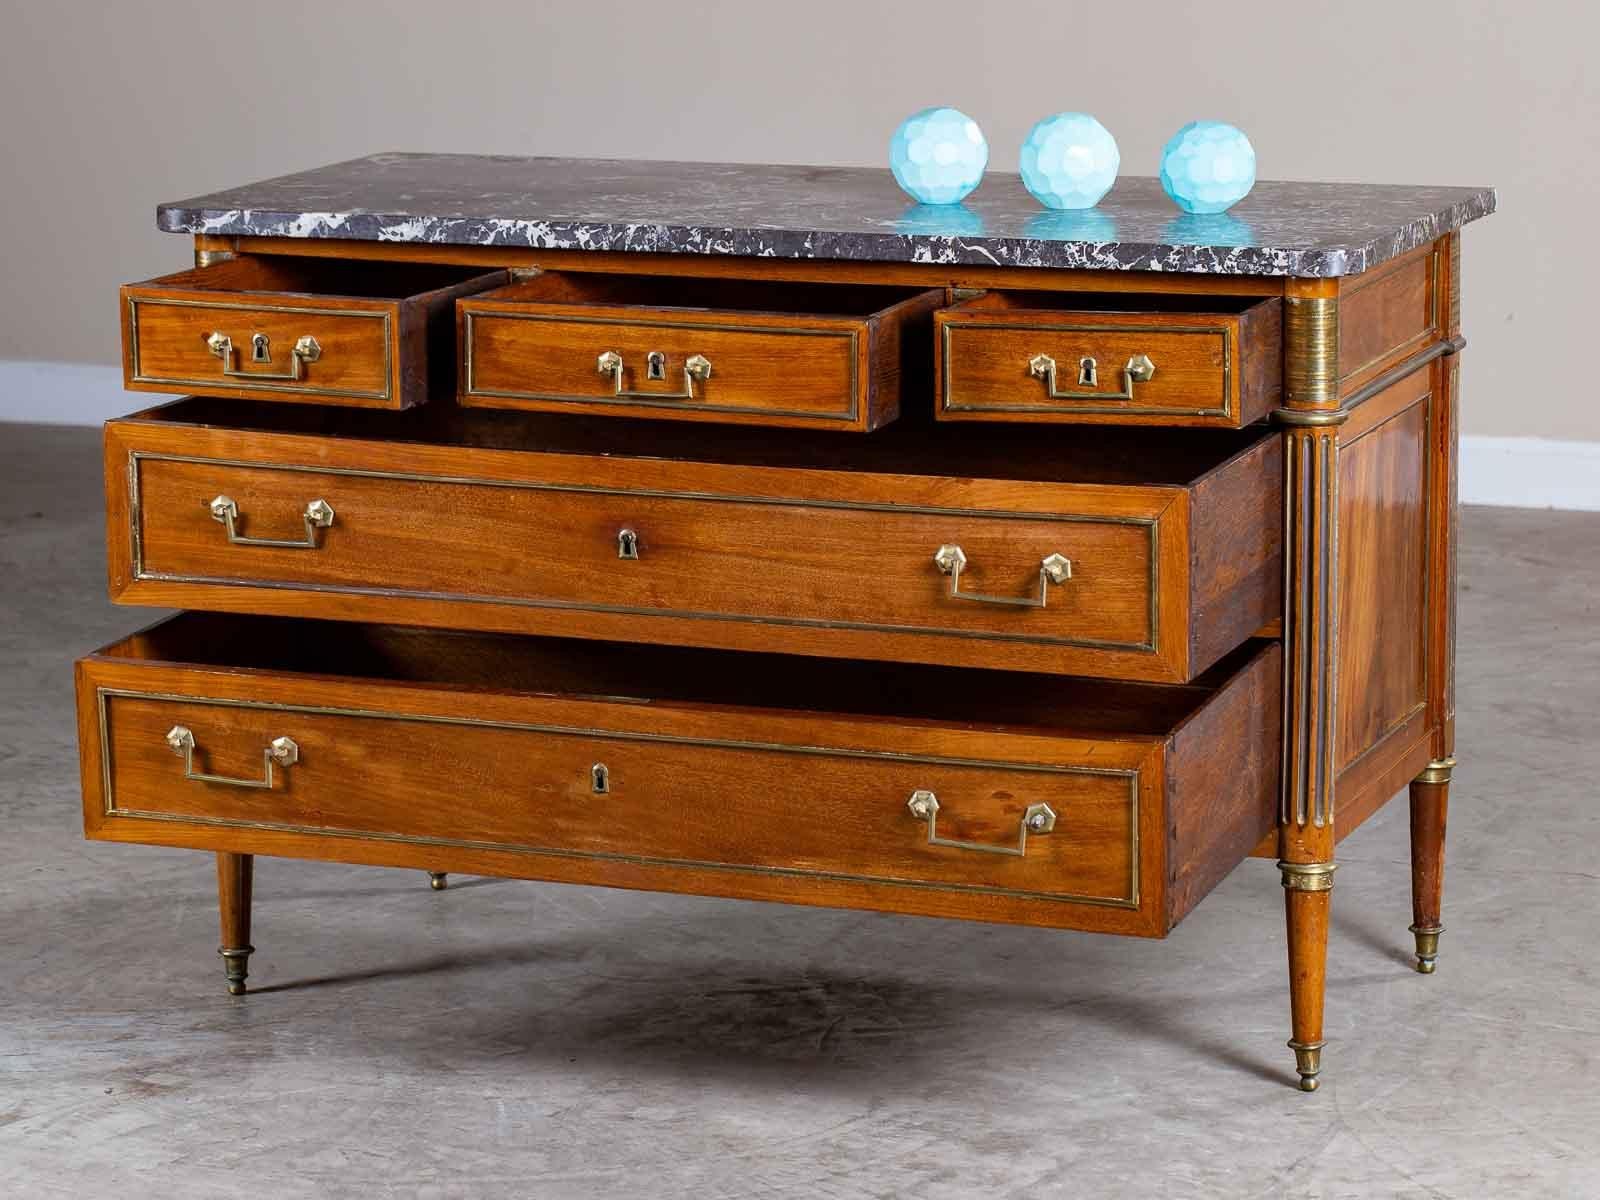 This Neoclassical Louis XVI period antique French walnut commode chest, circa 1790 has a marble top along with five drawers all embellished with brass detailing. The elegant simplicity of this late 18th century French chest of drawers results from